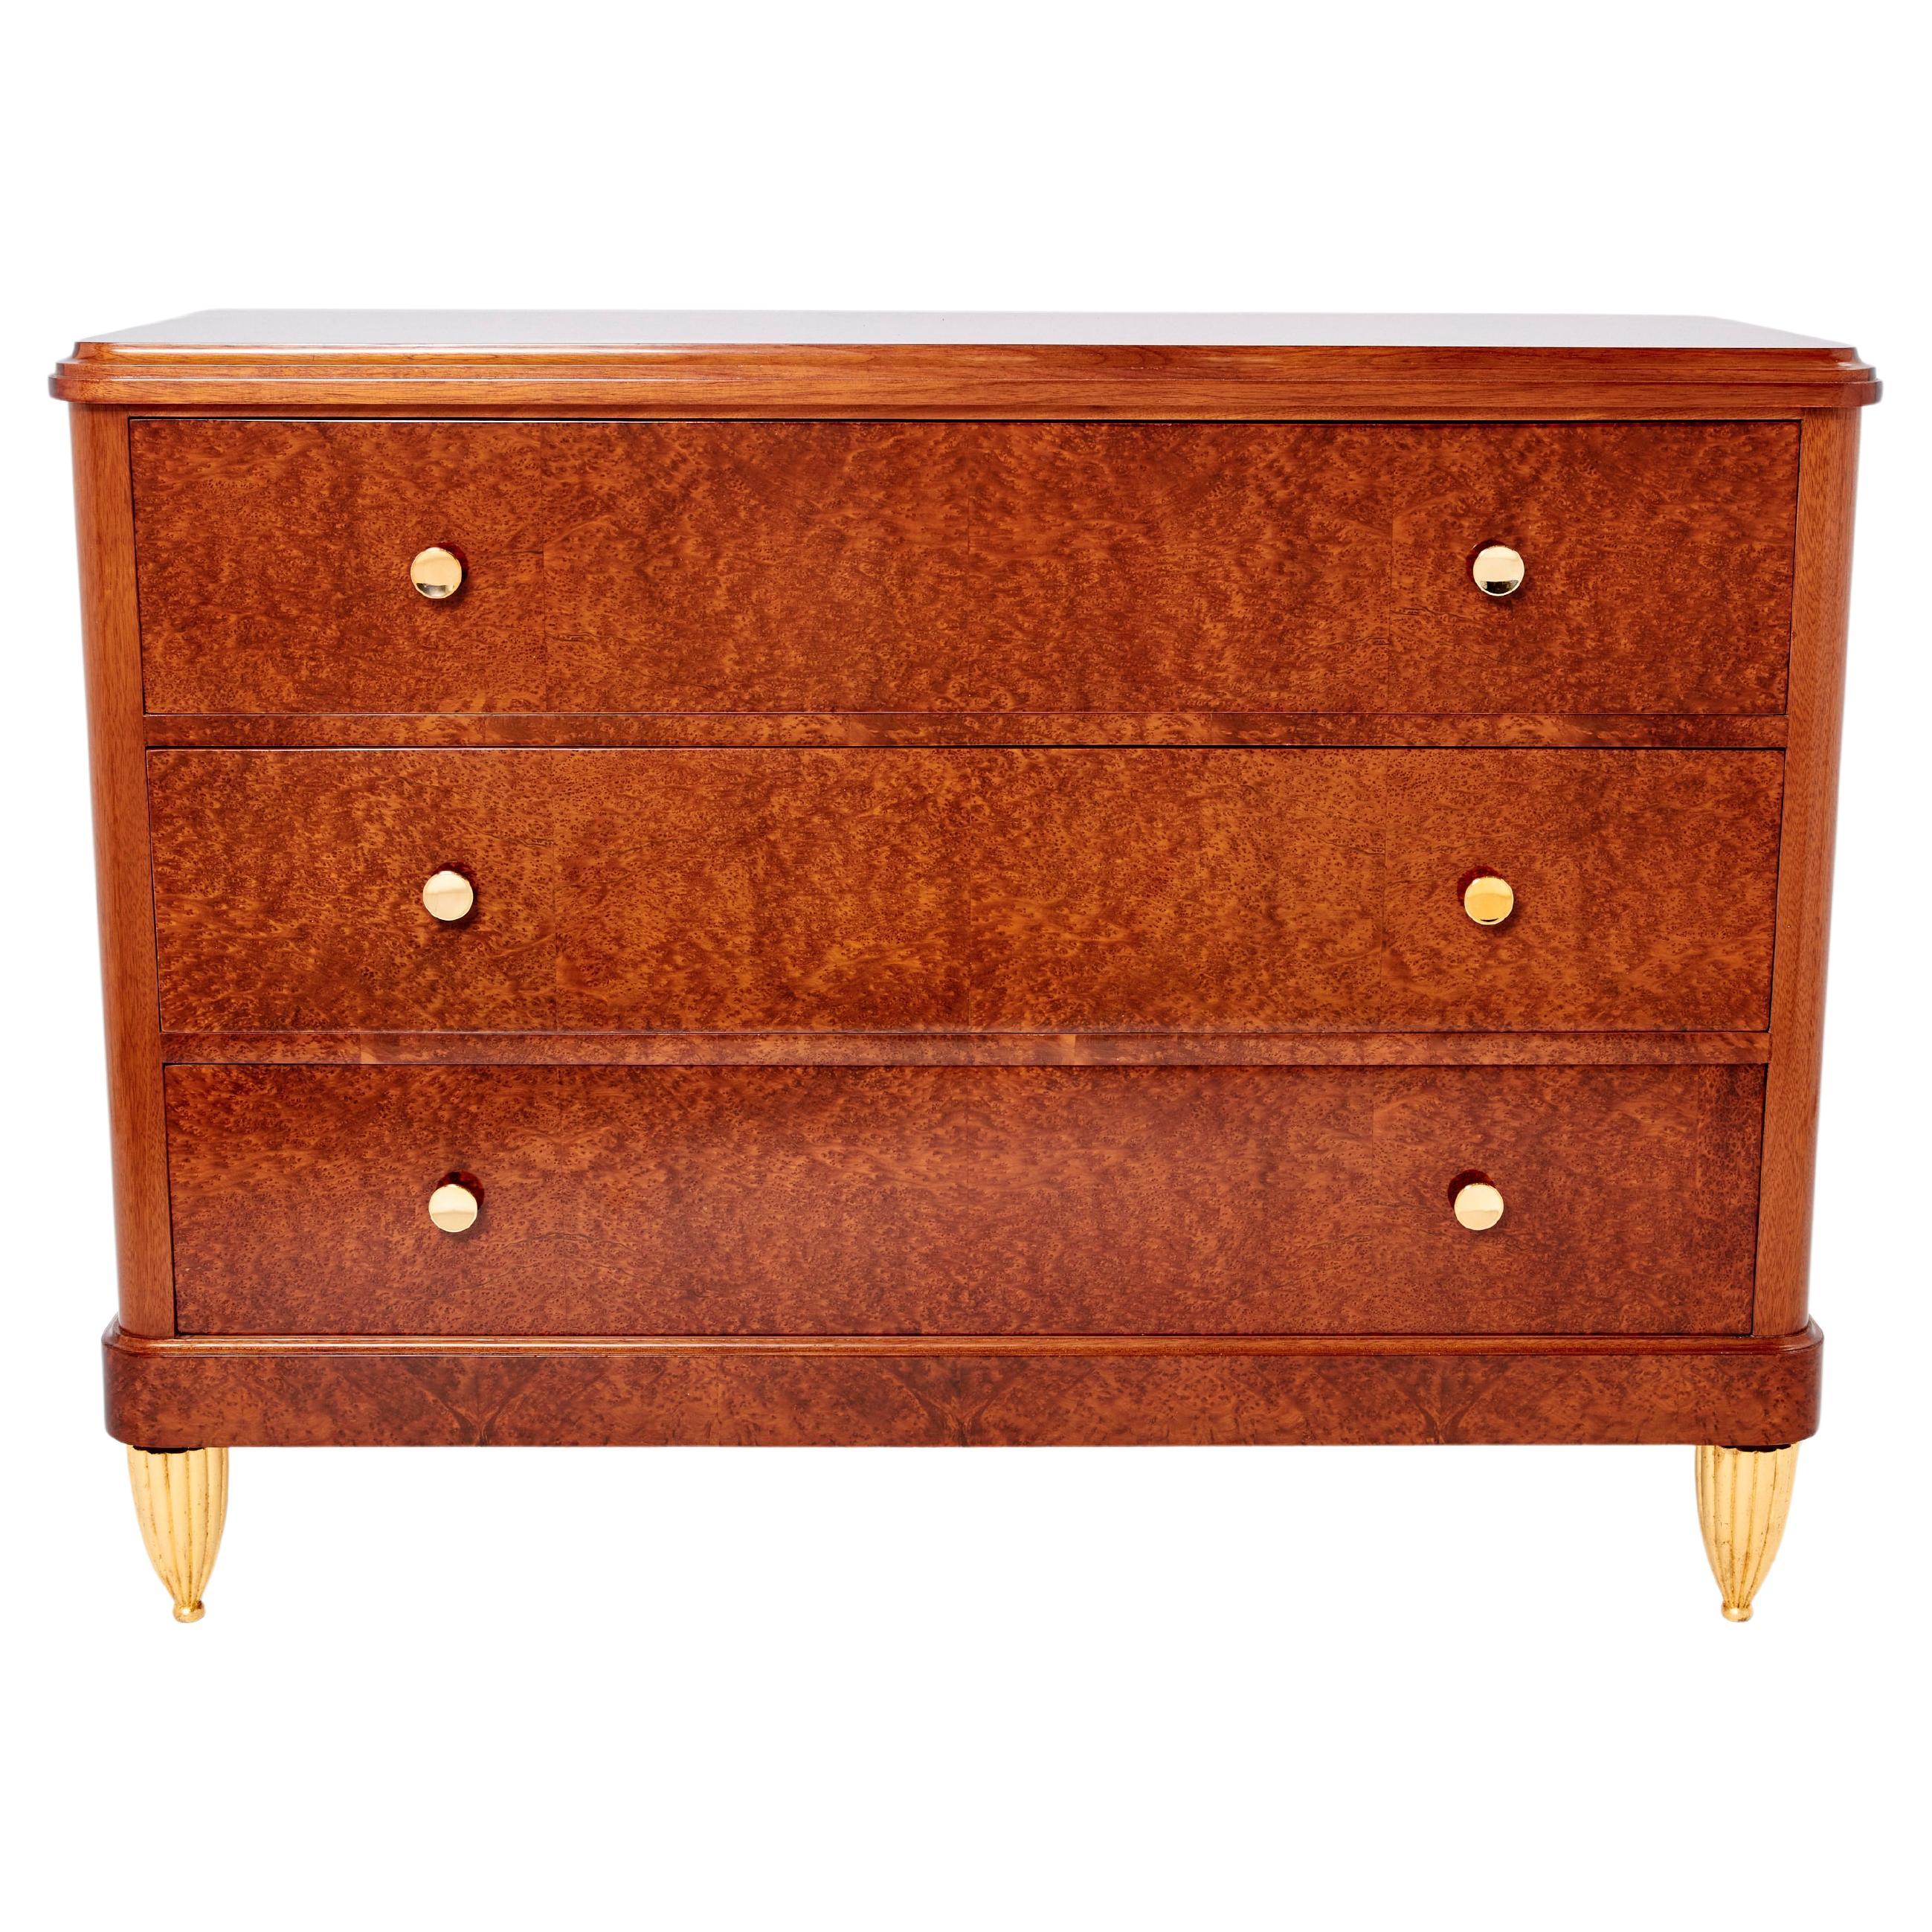 Art Deco Amboyna Burl Wood Commode Attr. Maurice Dufrène 1940s For Sale